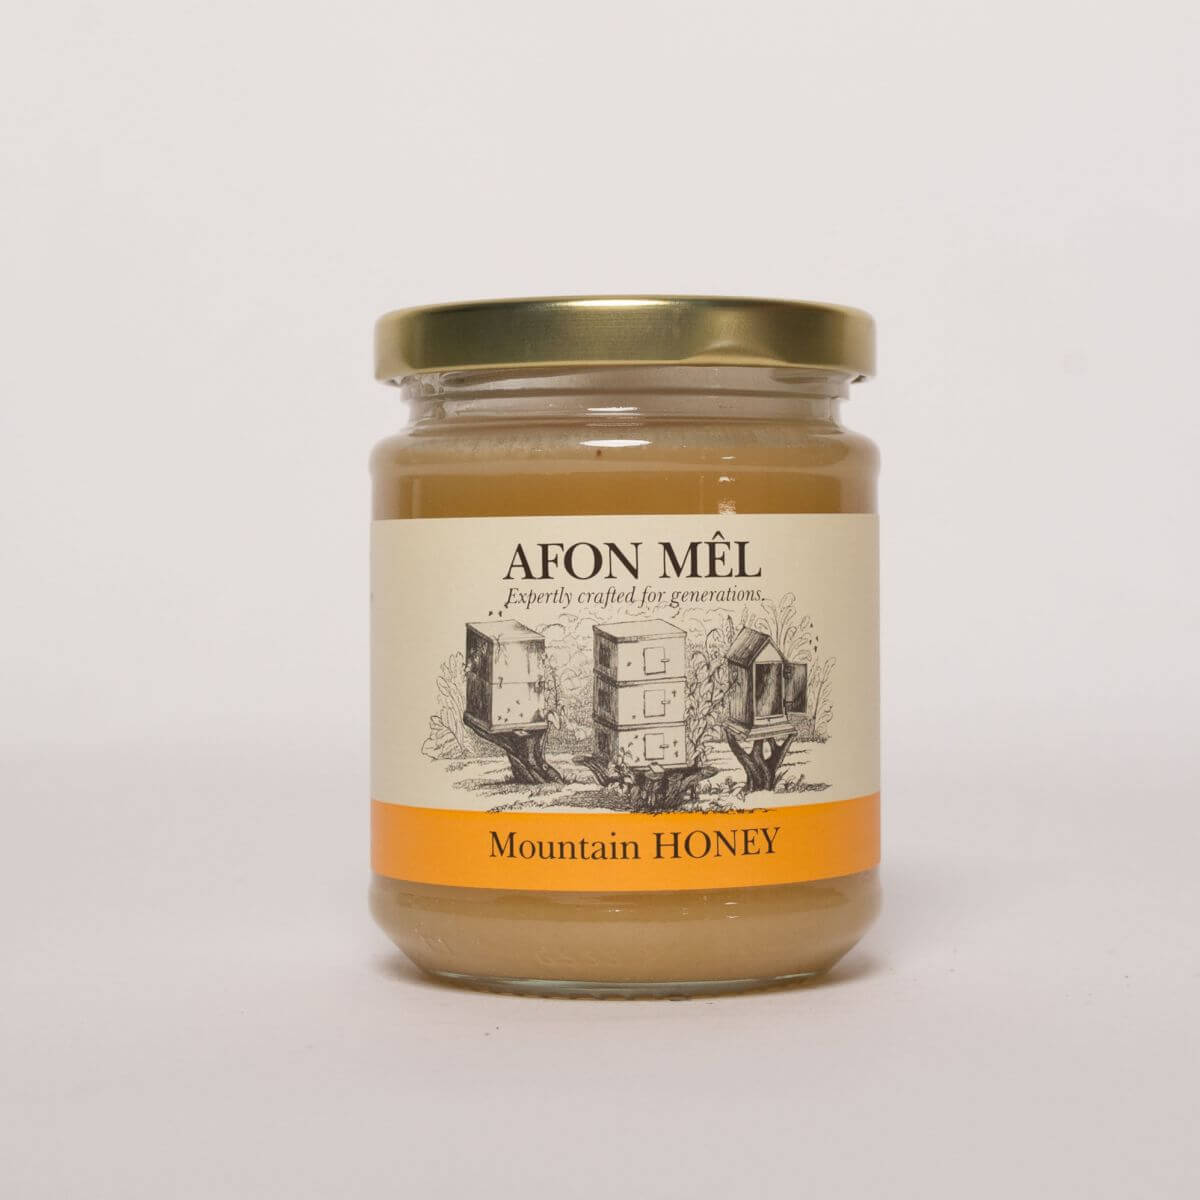 Image of Welsh Mountain Honey made in the UK by Afon Mel. Buying this product supports a UK business, jobs and the local community